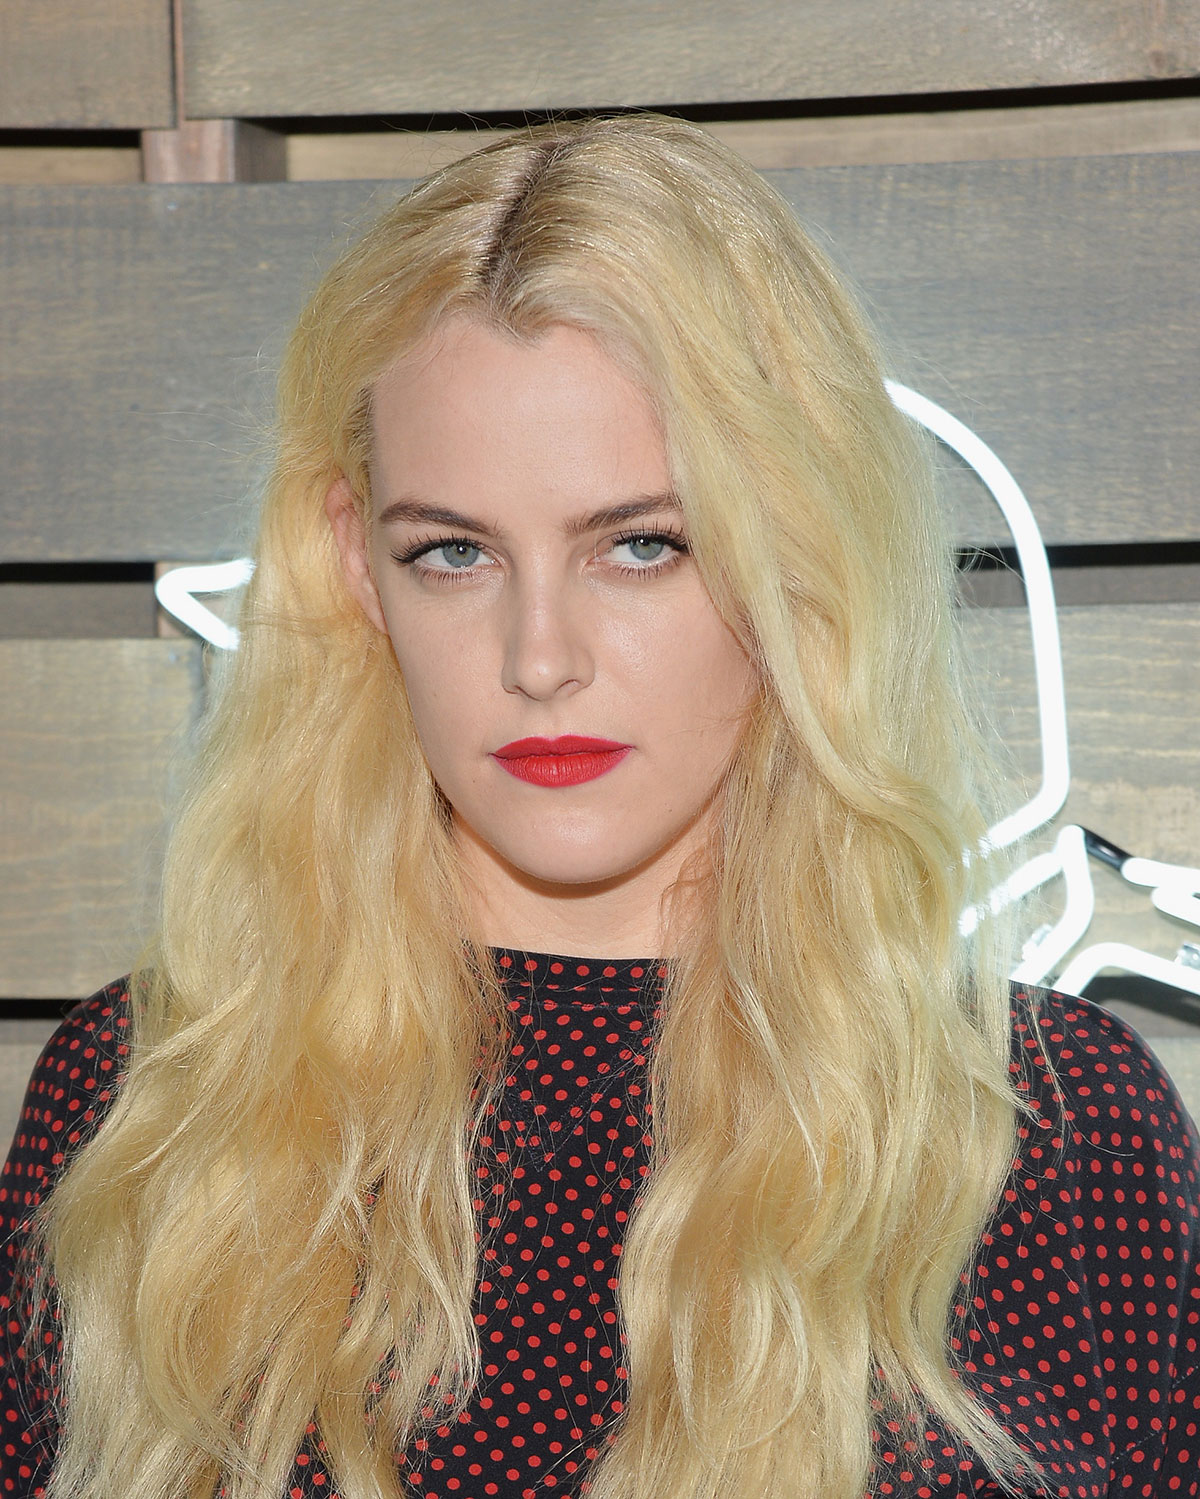 Riley Keough attends 2014 Coach Summer Party